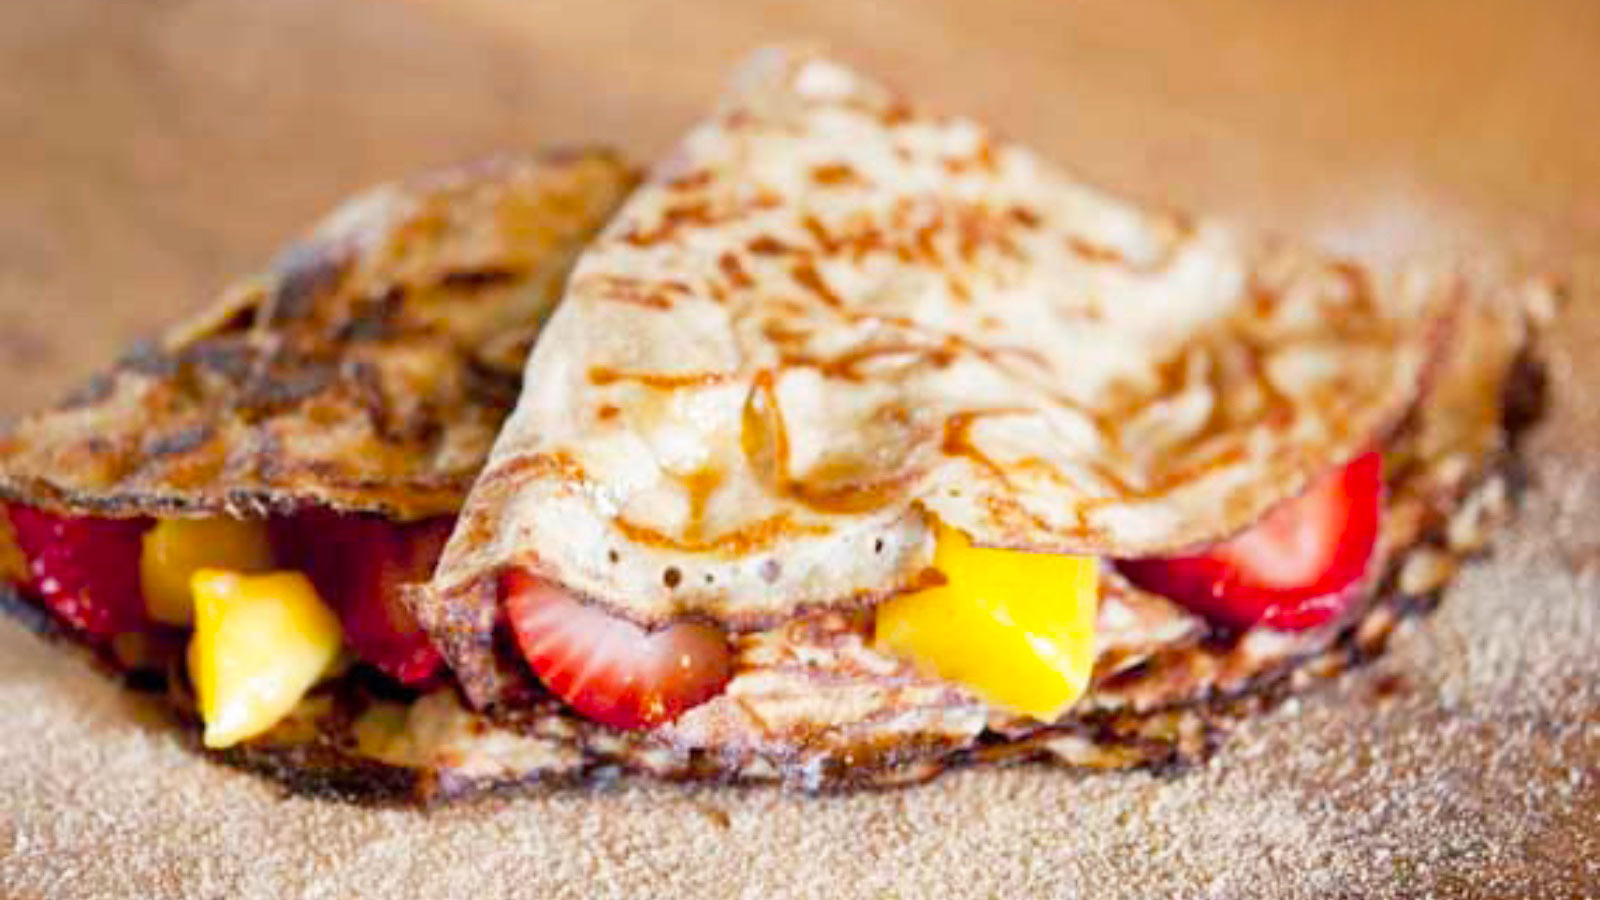 A closeup of two folded crepes stuffed with strawberries and mango and sprinkled with powdered sugar on a wood surface.